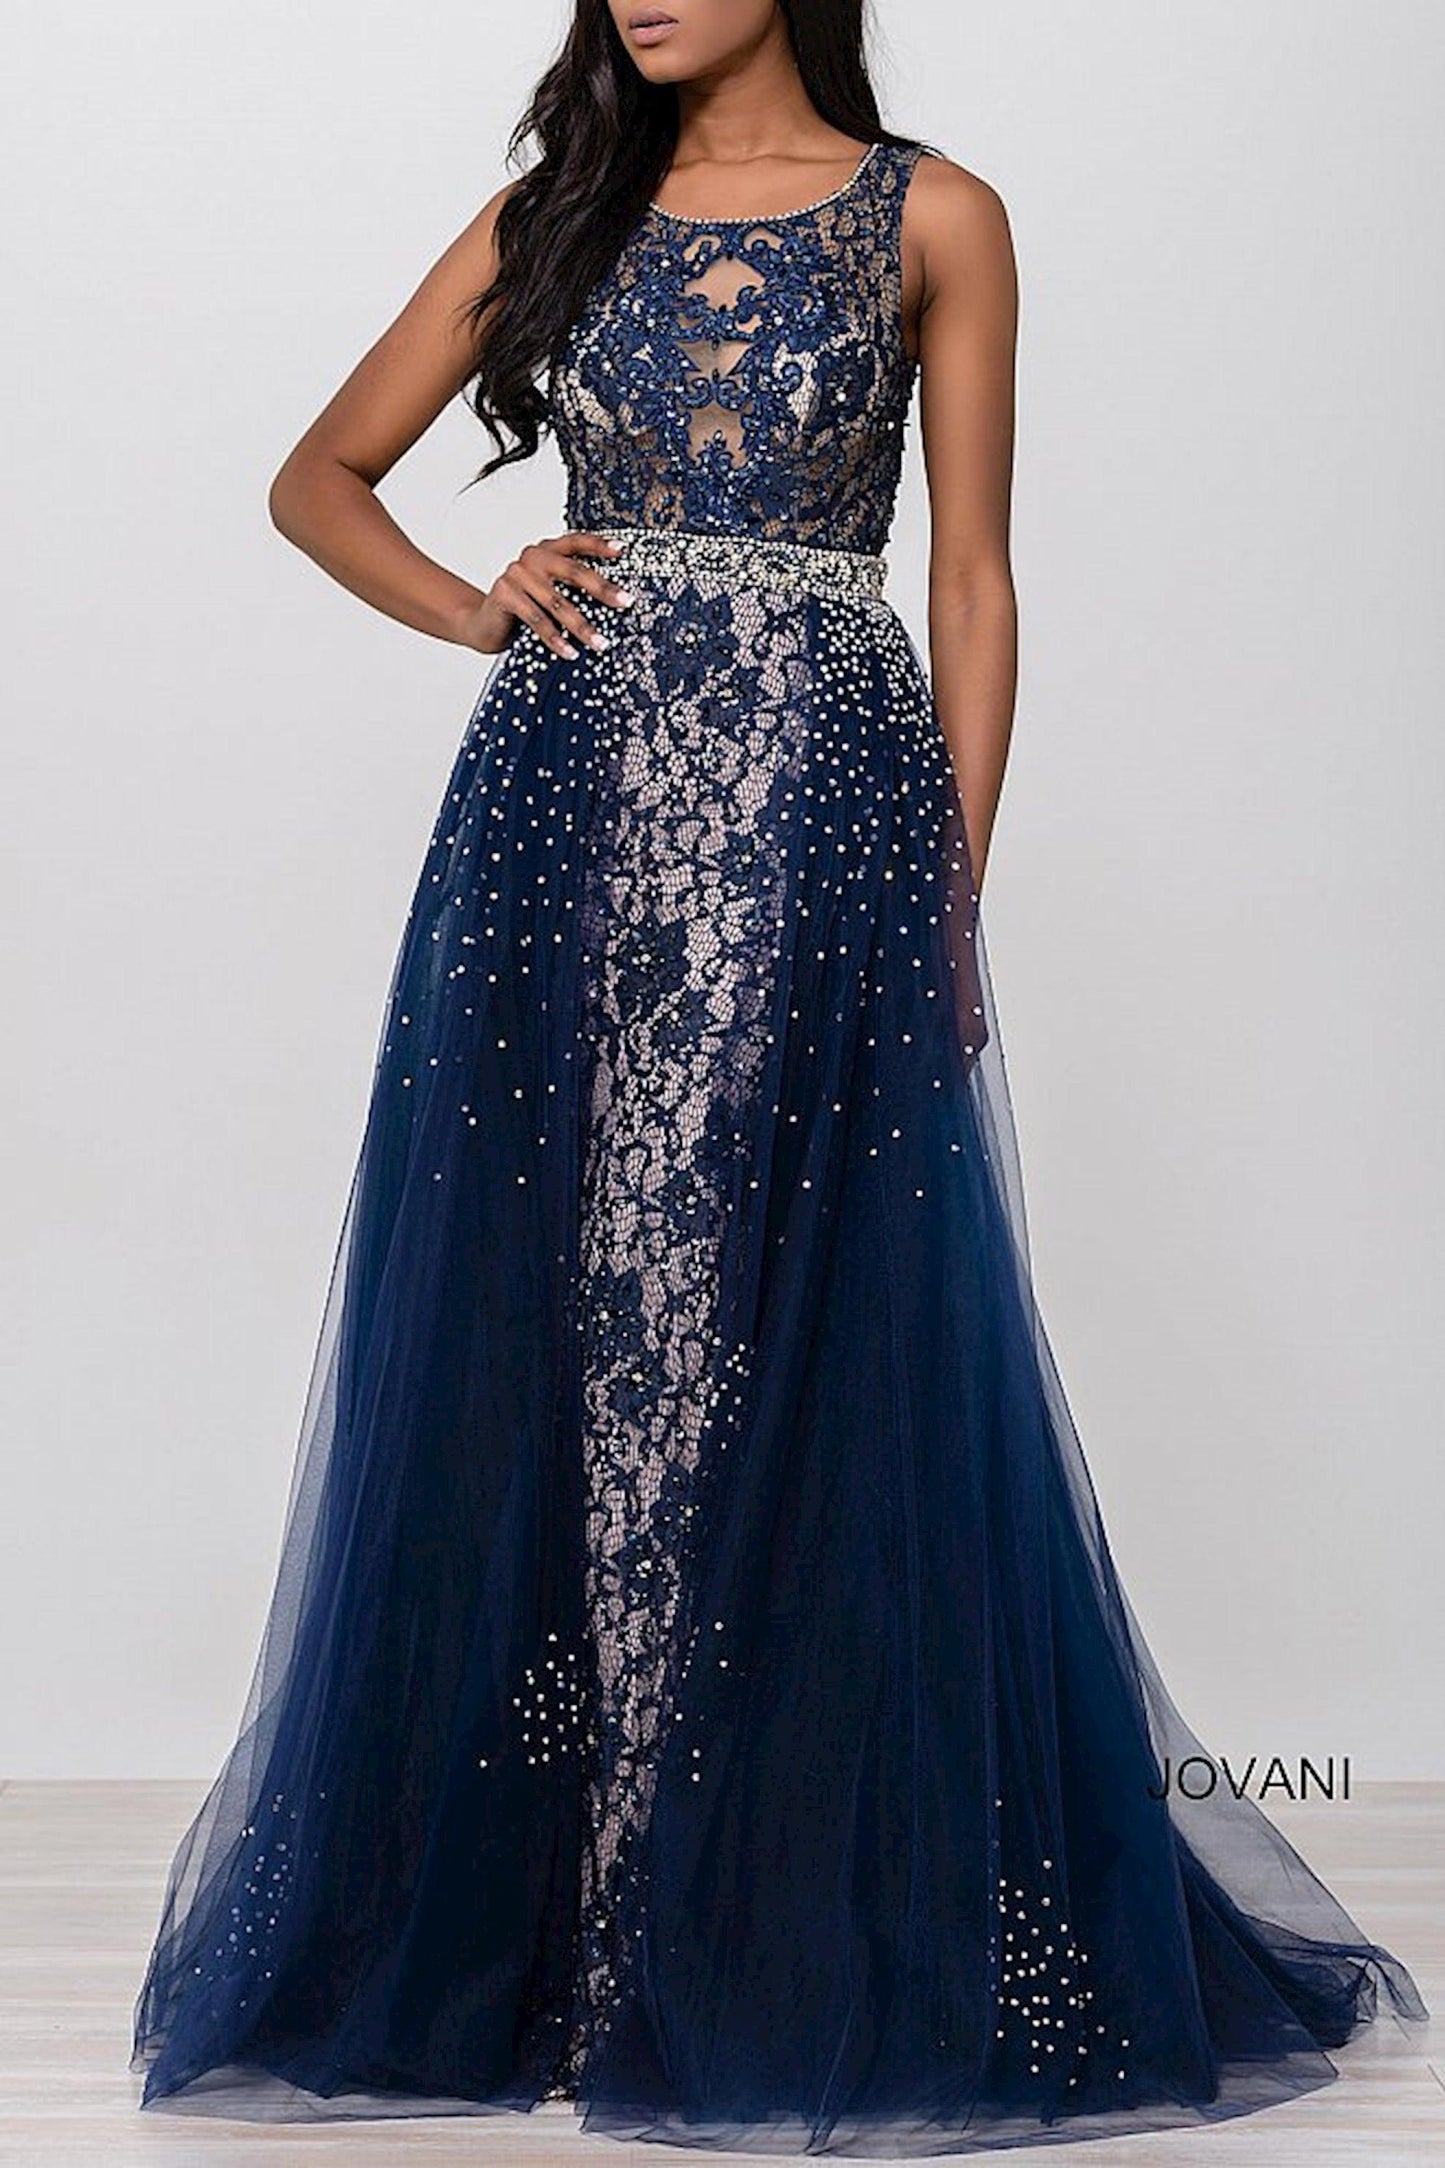 Jovani Sleeveless Long Prom Gown 36805 - The Dress Outlet